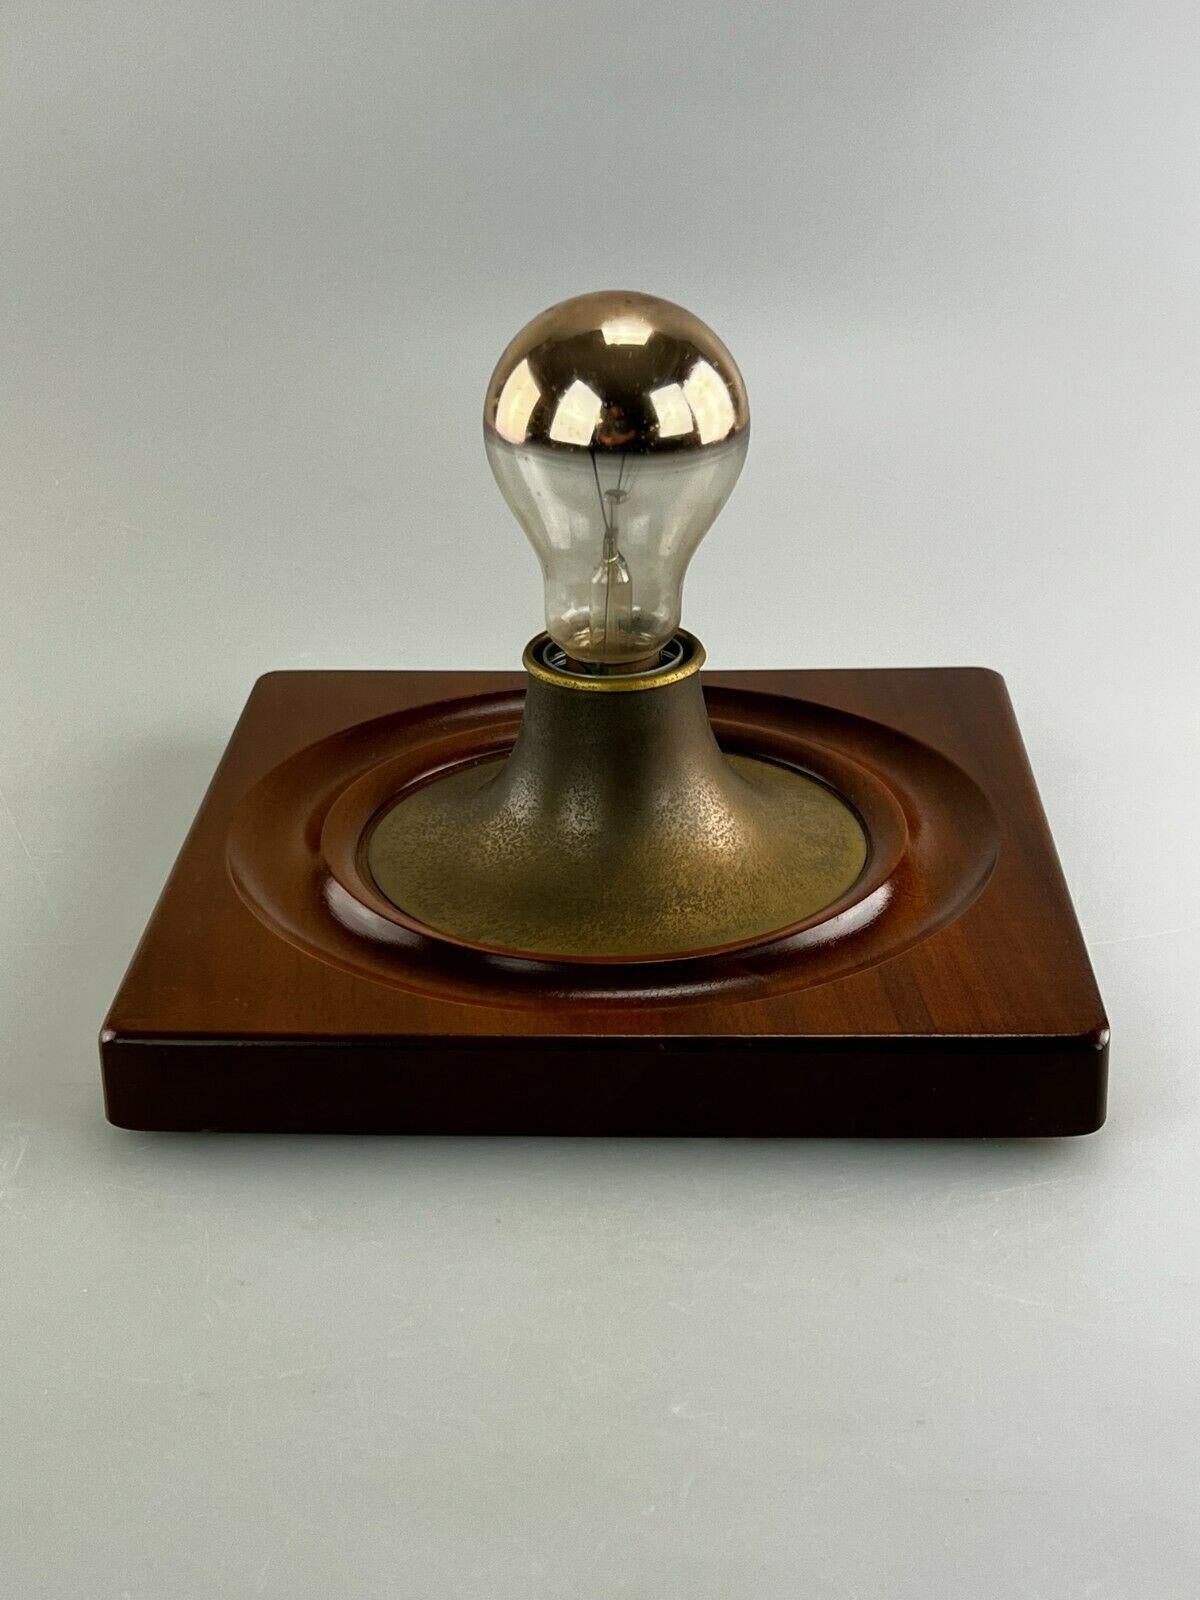 60s 70s lamp light wall lamp wood metal Space Age Design 60s 70s

Object: wall lamp

Manufacturer:

Condition: good - vintage

Age: around 1960-1970

Dimensions:

24cm x 24cm x 8cm

Other notes:

The pictures serve as part of the